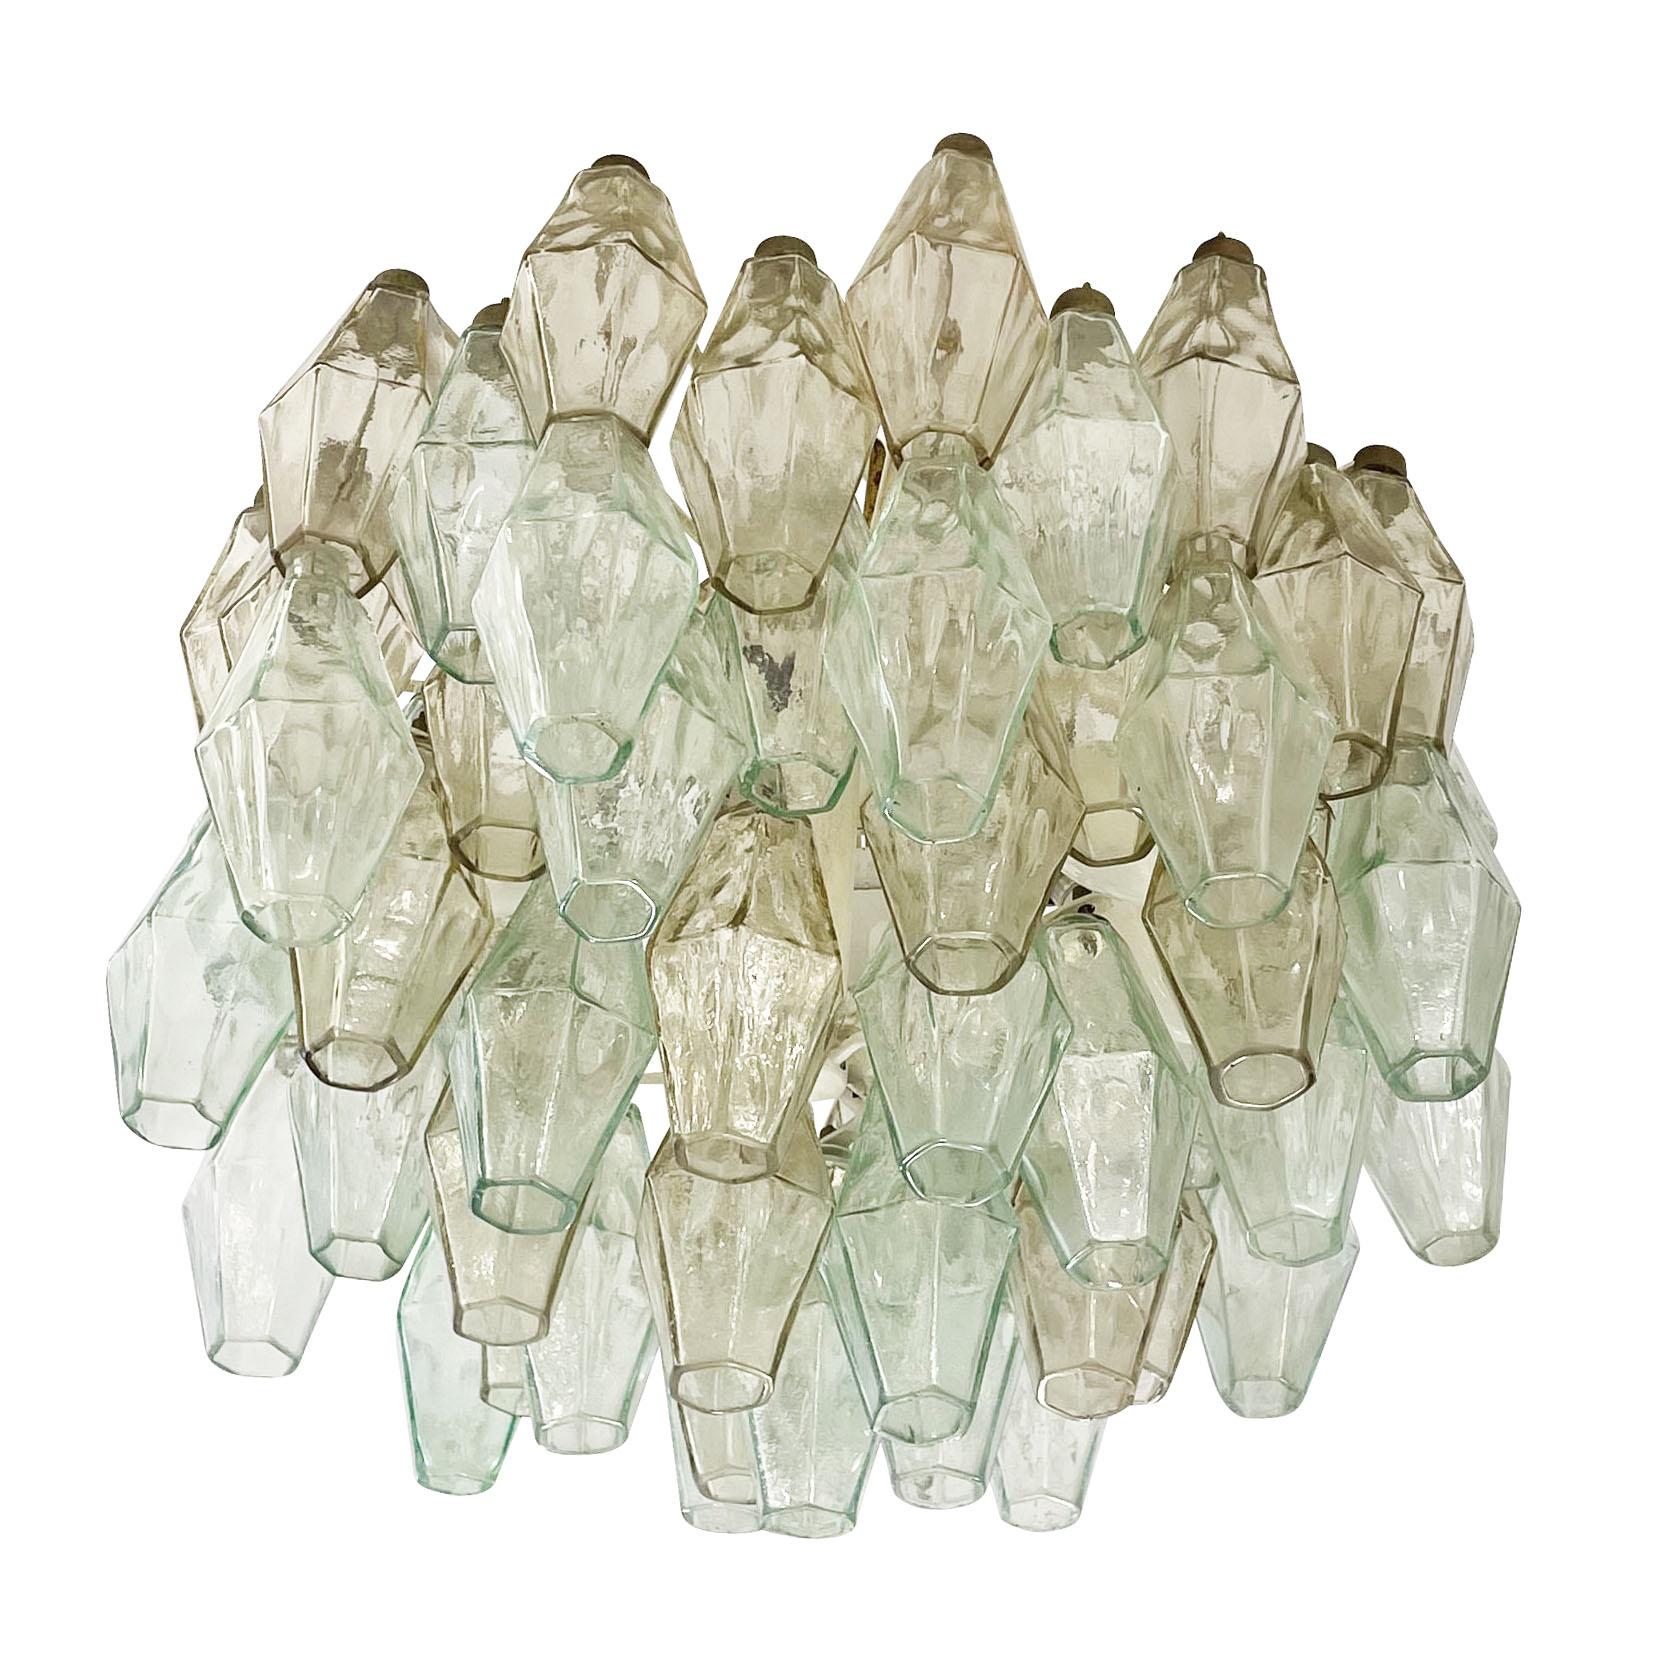 Mid-century chandelier by Venini made with their iconic poliedri Murano glasses. The glasses are a mix of light green ones and amber ones mounted on a white lacquered frame. Ready to hang on a chain.

Condition: 
Excellent vintage condition,